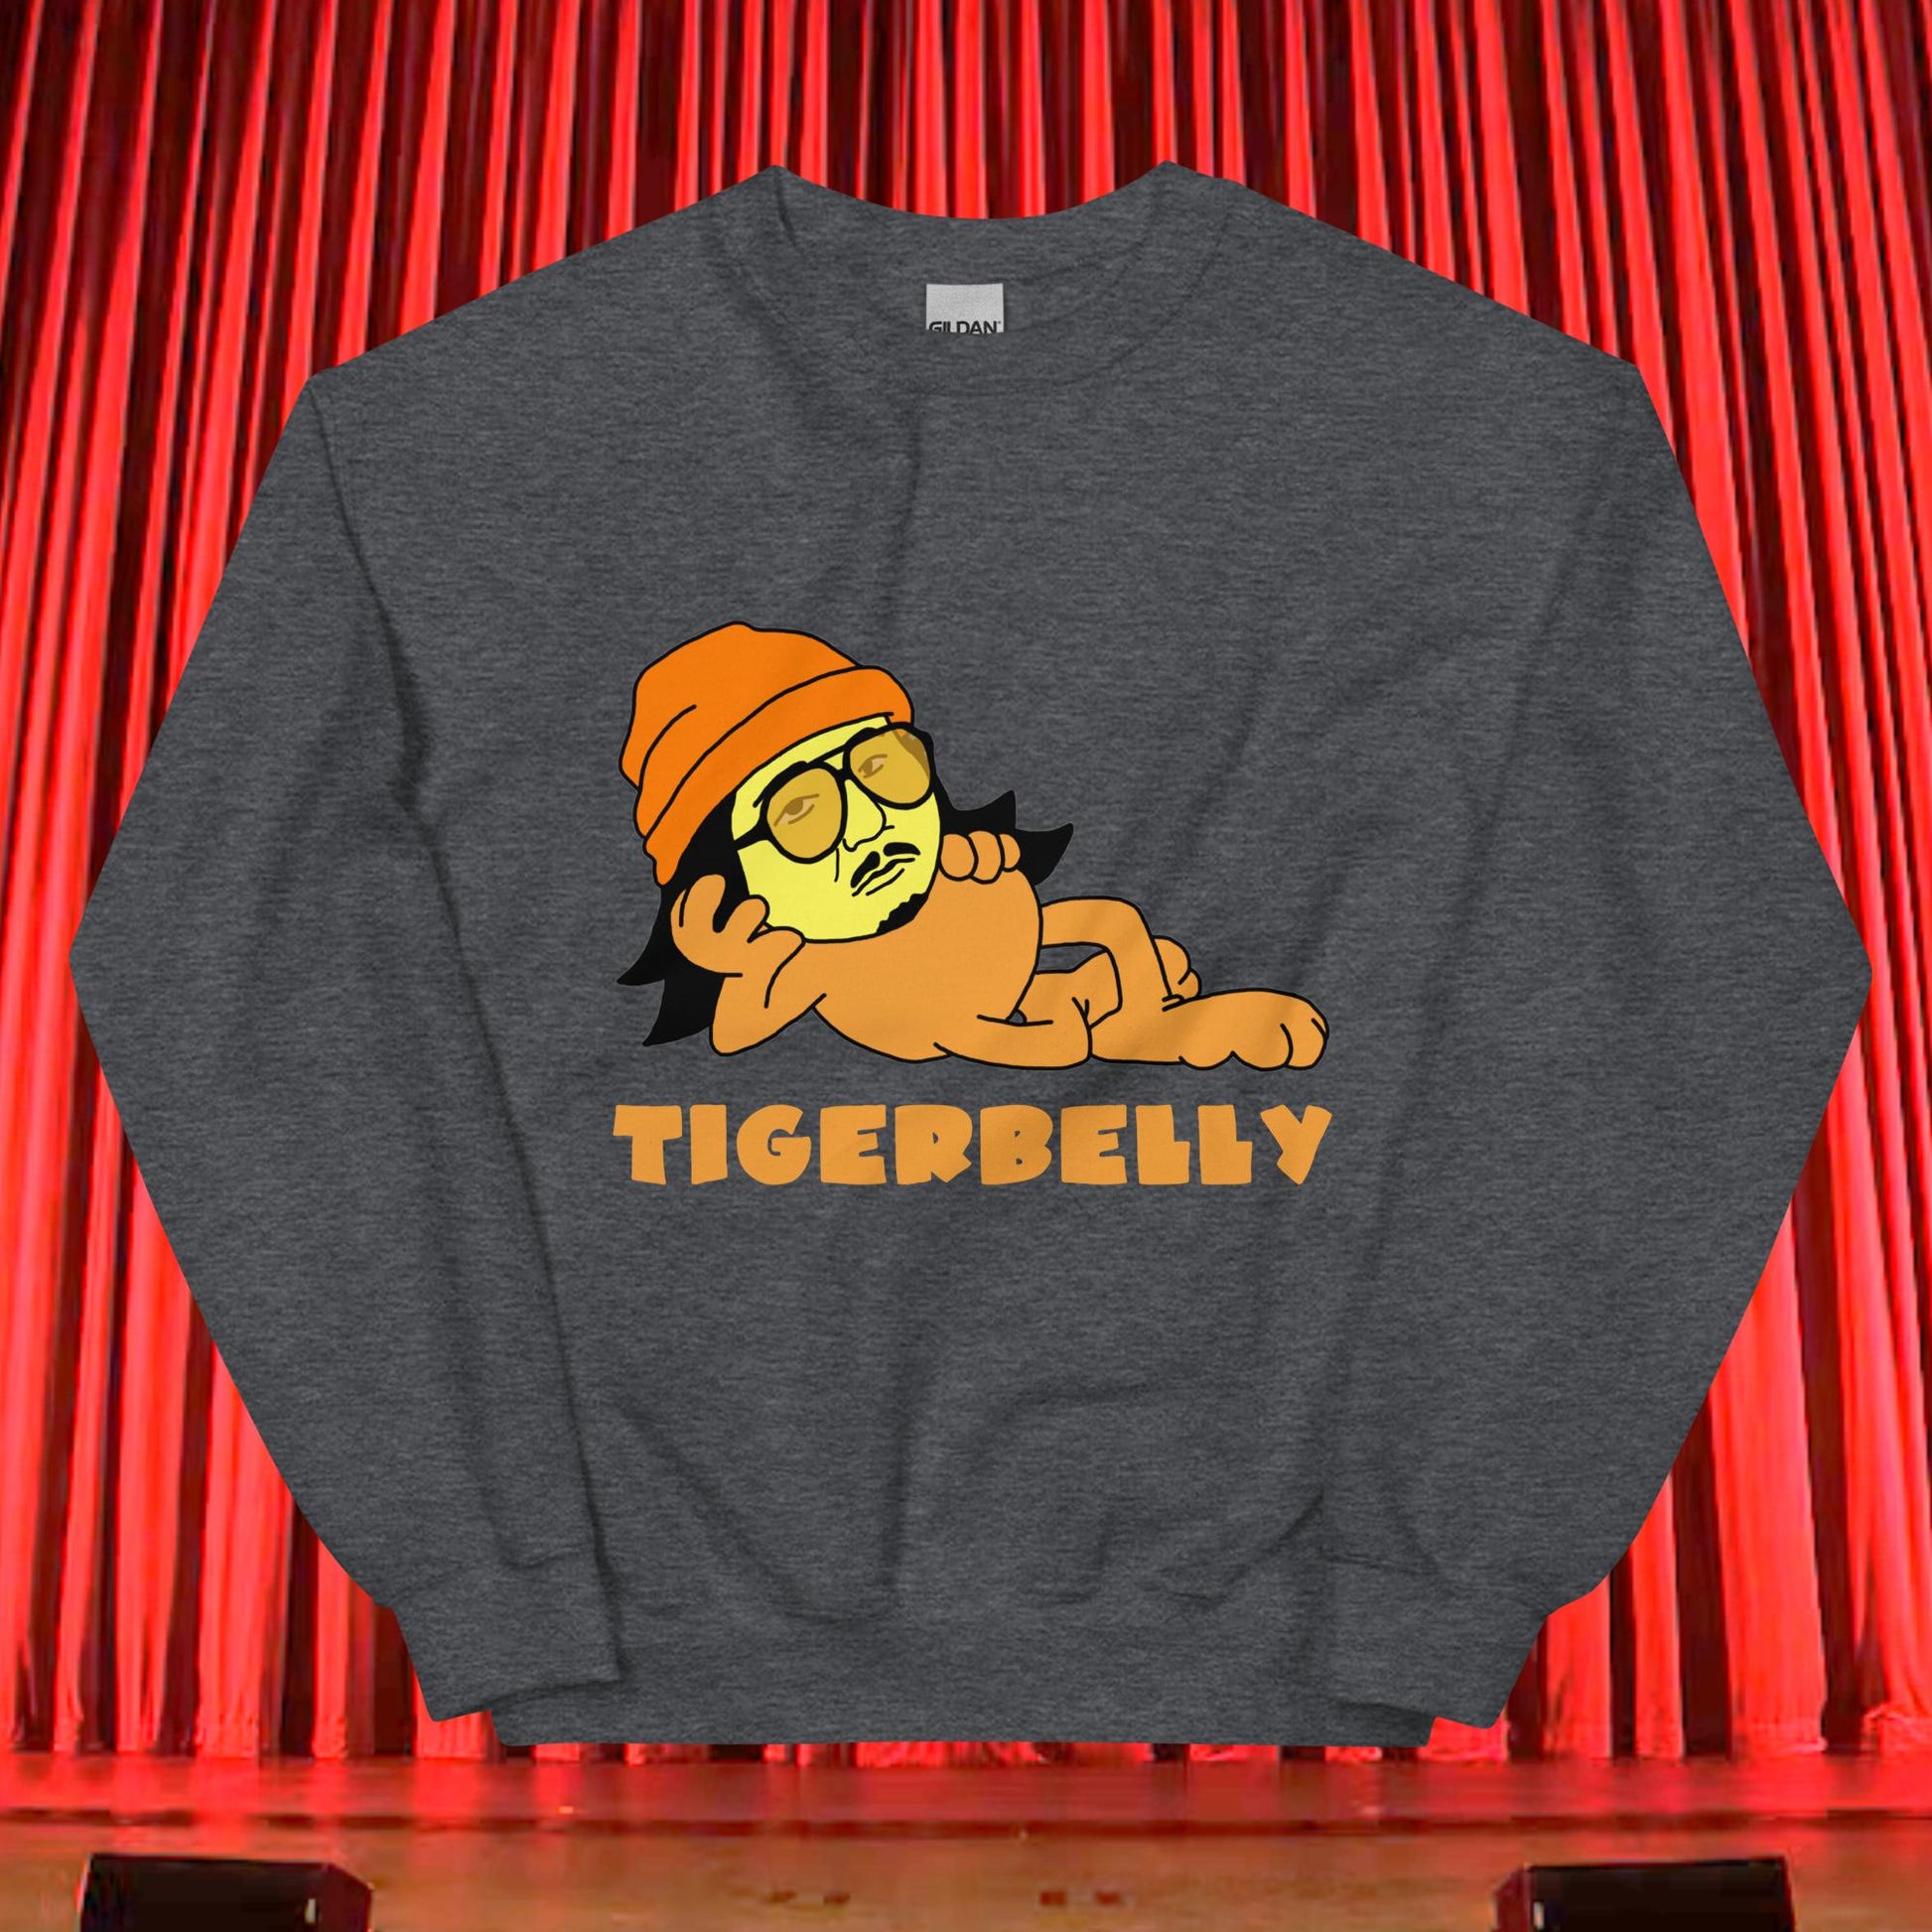 Bobby Lee Tigerbelly, Bobby Lee Merch, Tigerbelly Merch, Bobby Lee Gift, Funny Tigerbelly Gift, Tigerbelly Podcast, TigerBelly Unisex Sweatshirt Next Cult Brand Bobby Lee, Podcasts, Stand-up Comedy, TigerBelly